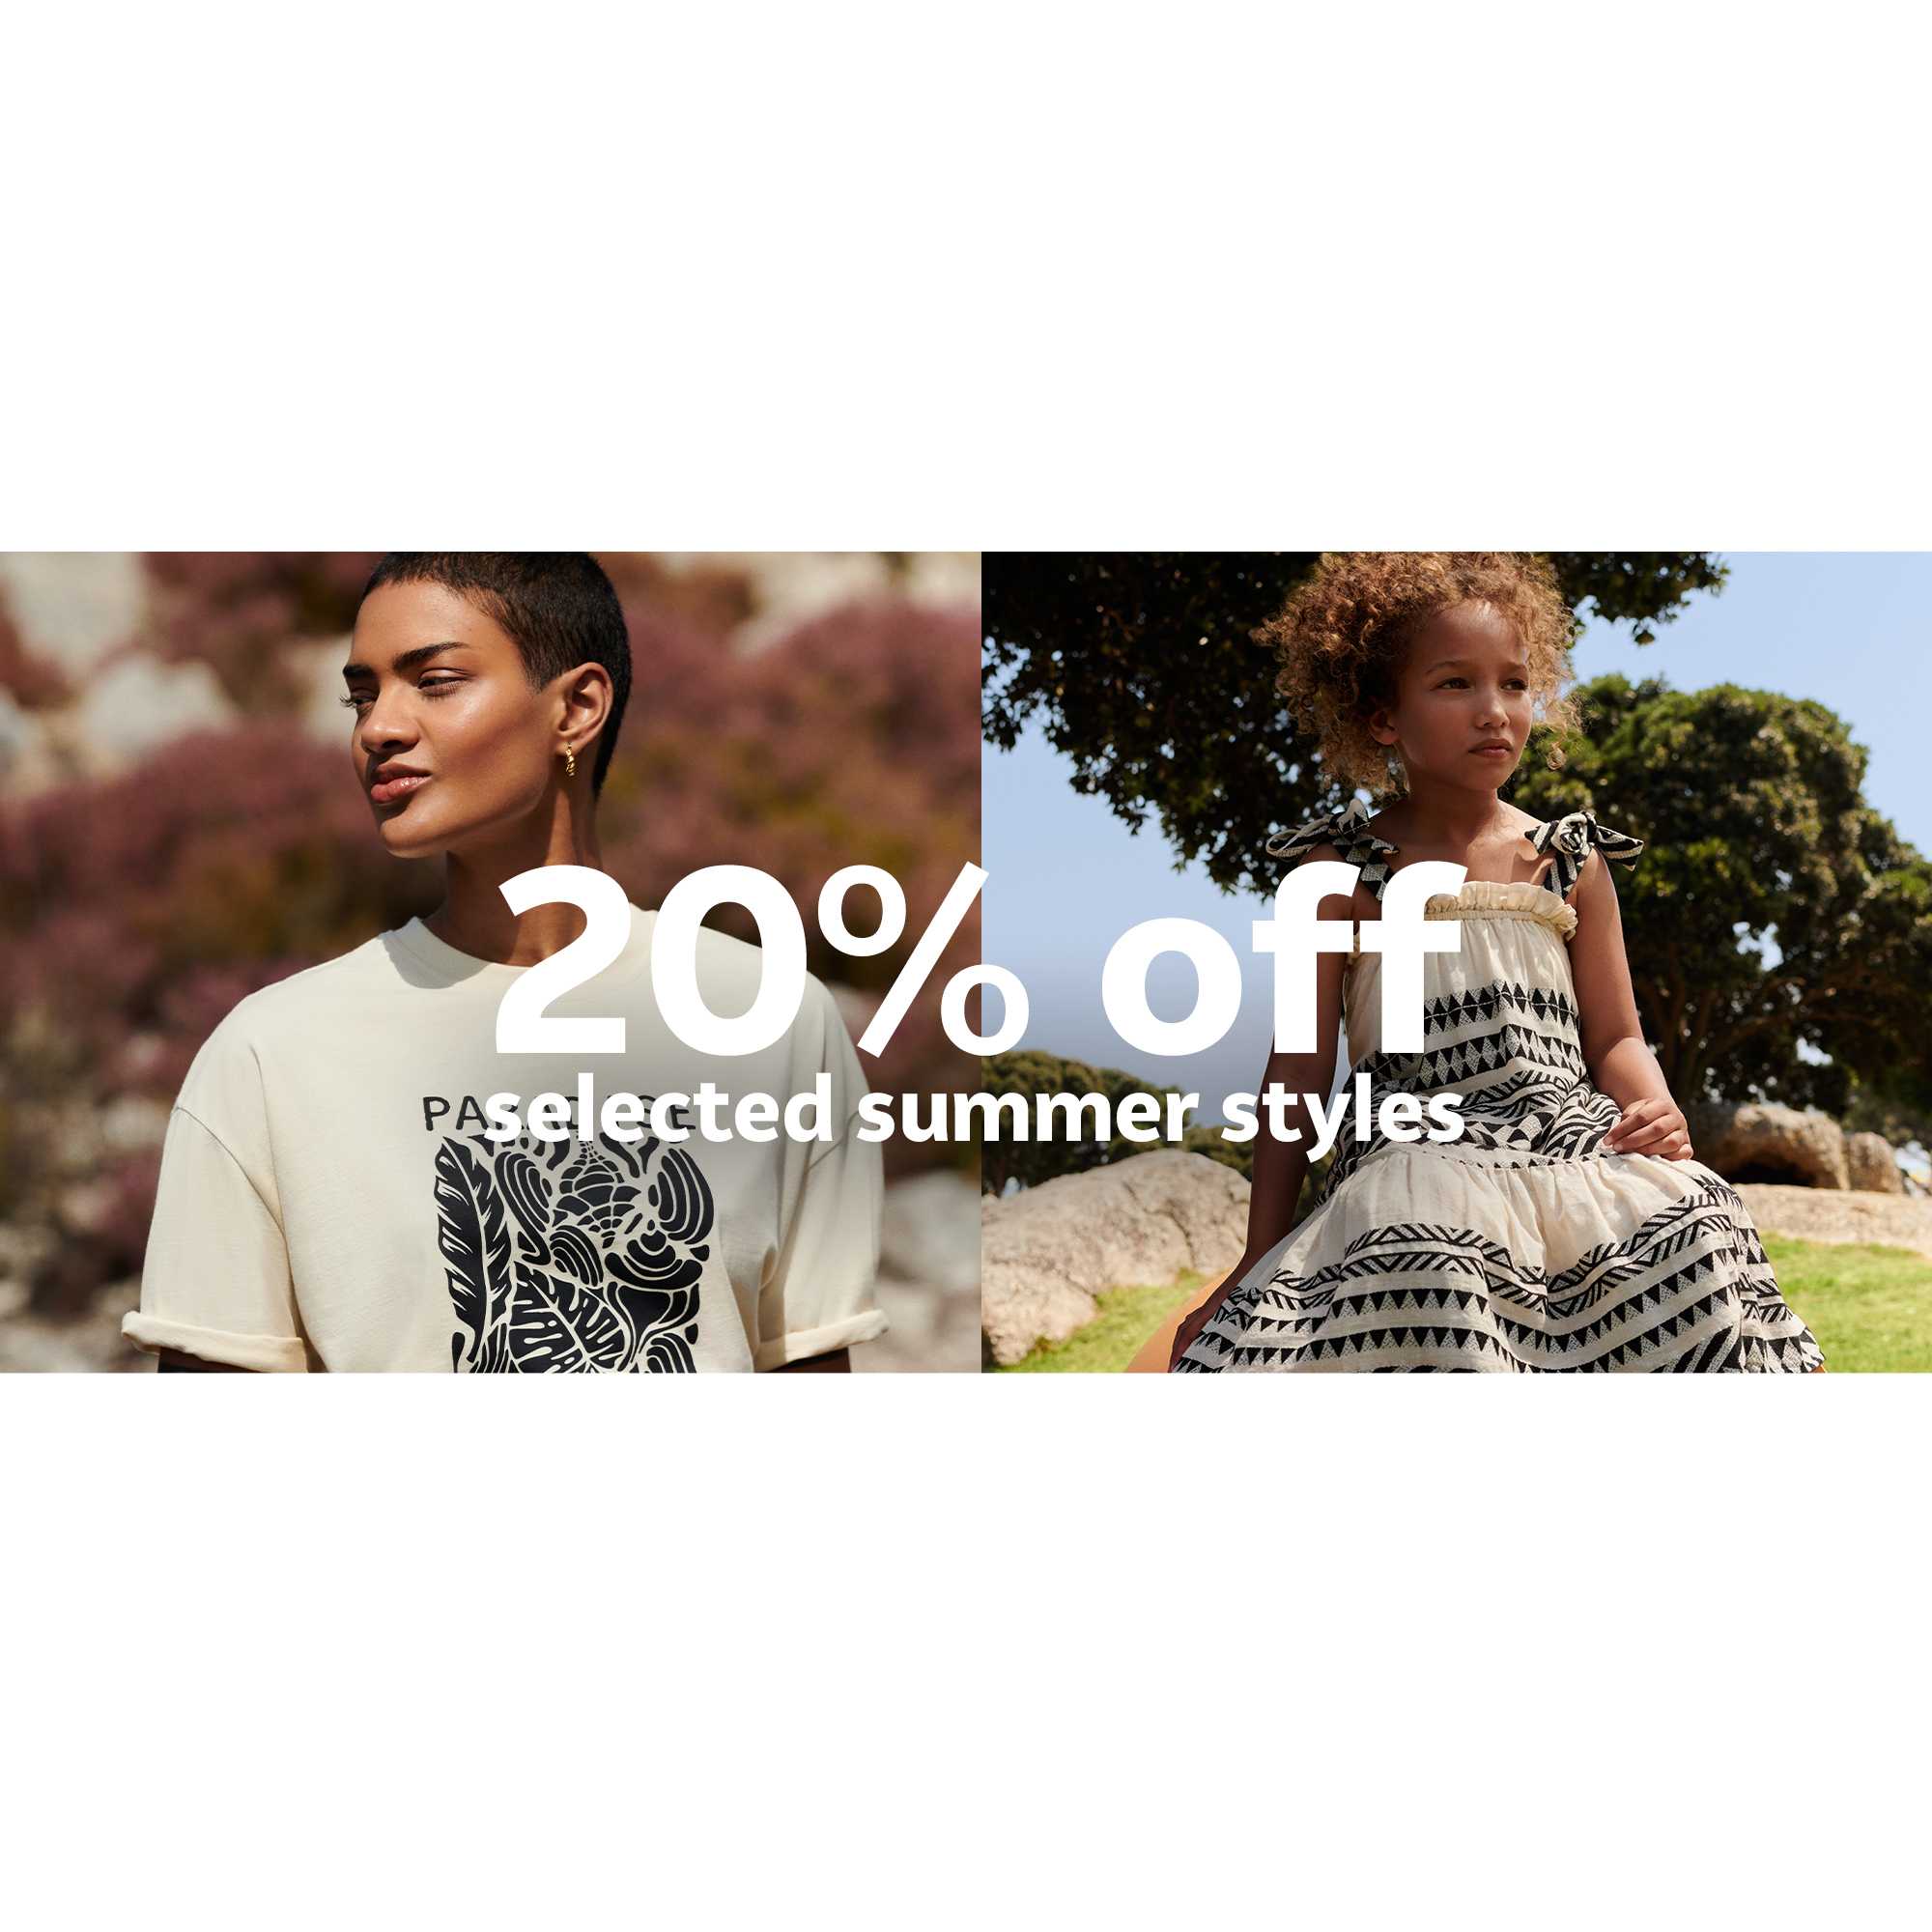 20% off selected summer styles.